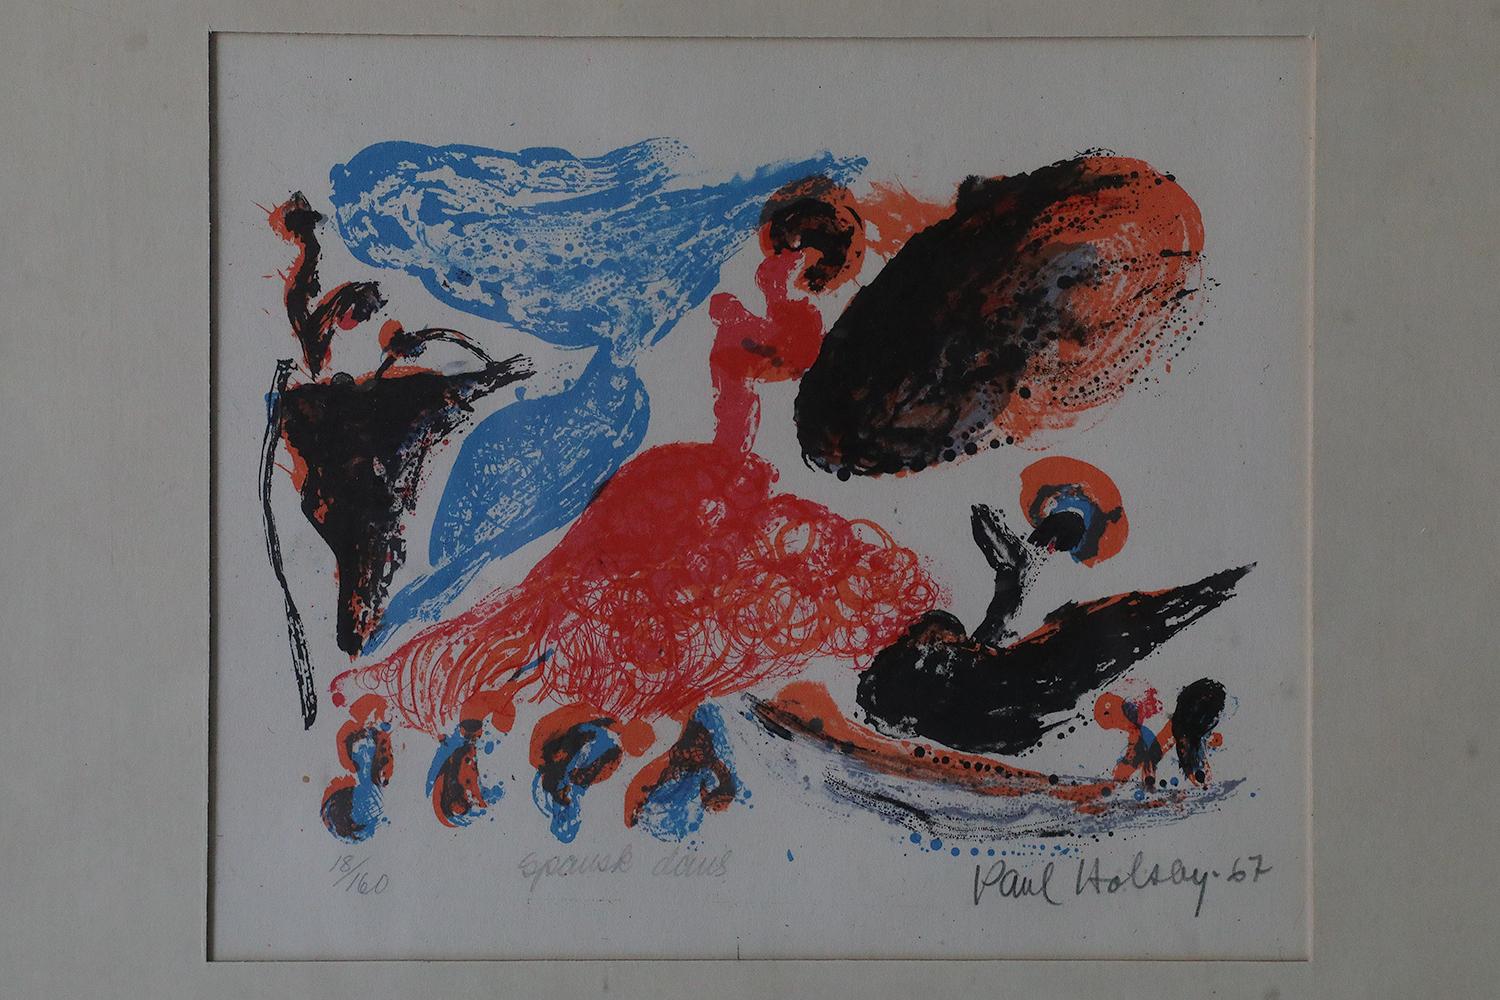 Paul Holsby, Spansk dans, 1967
Color lithograph
Number 18/160
The work is signed by the artist, date, title and individual number (in pencil).
Working dimensions 23/29
The work is framed

Paul Holsby was born in 1921 in Norrtälje, died in 2007 in